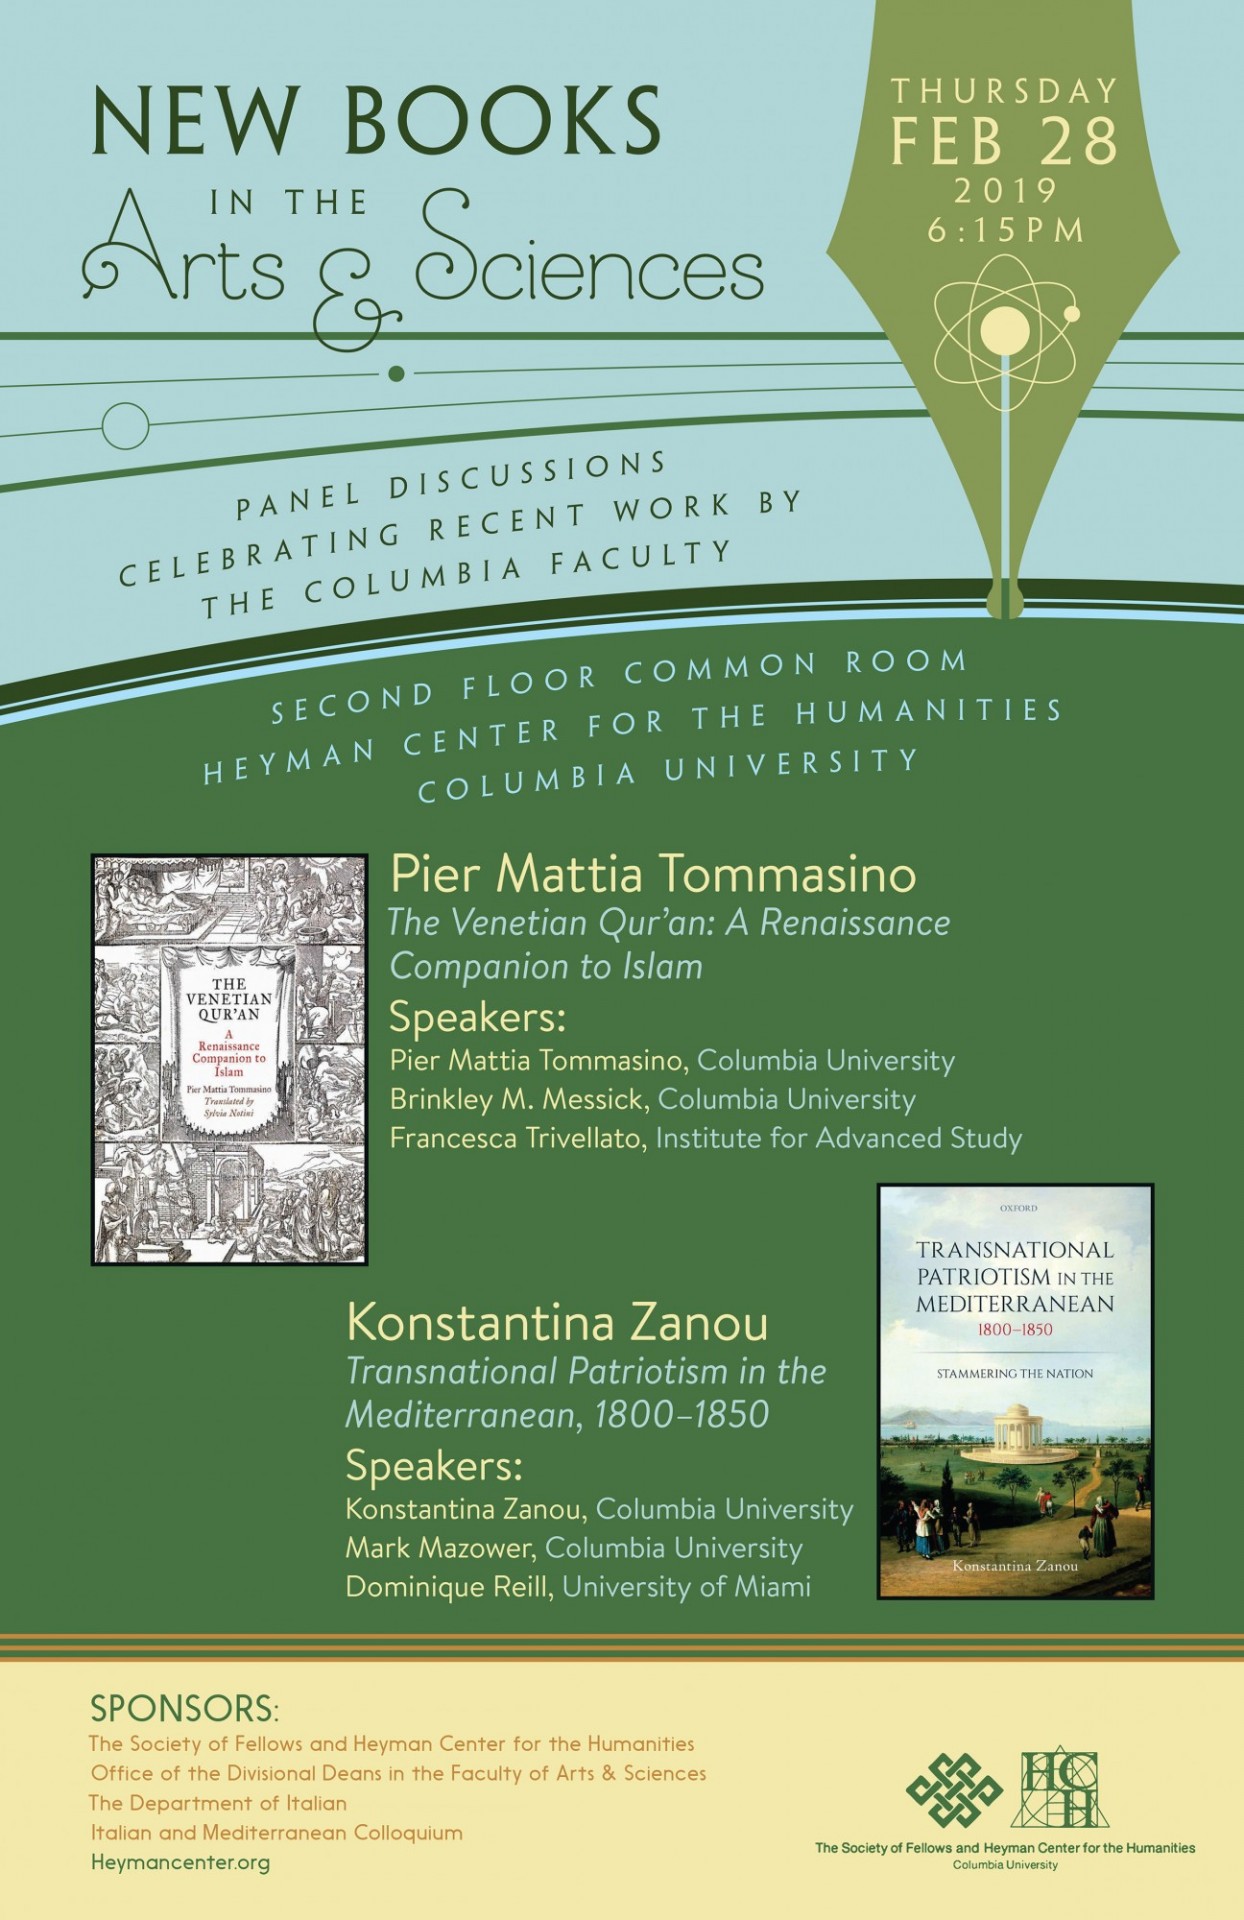 Poster advertising event "New Books in the Arts & Sciences: Celebrating Recent Work by Pier Mattia Tommasino and Konstantina Zanou"